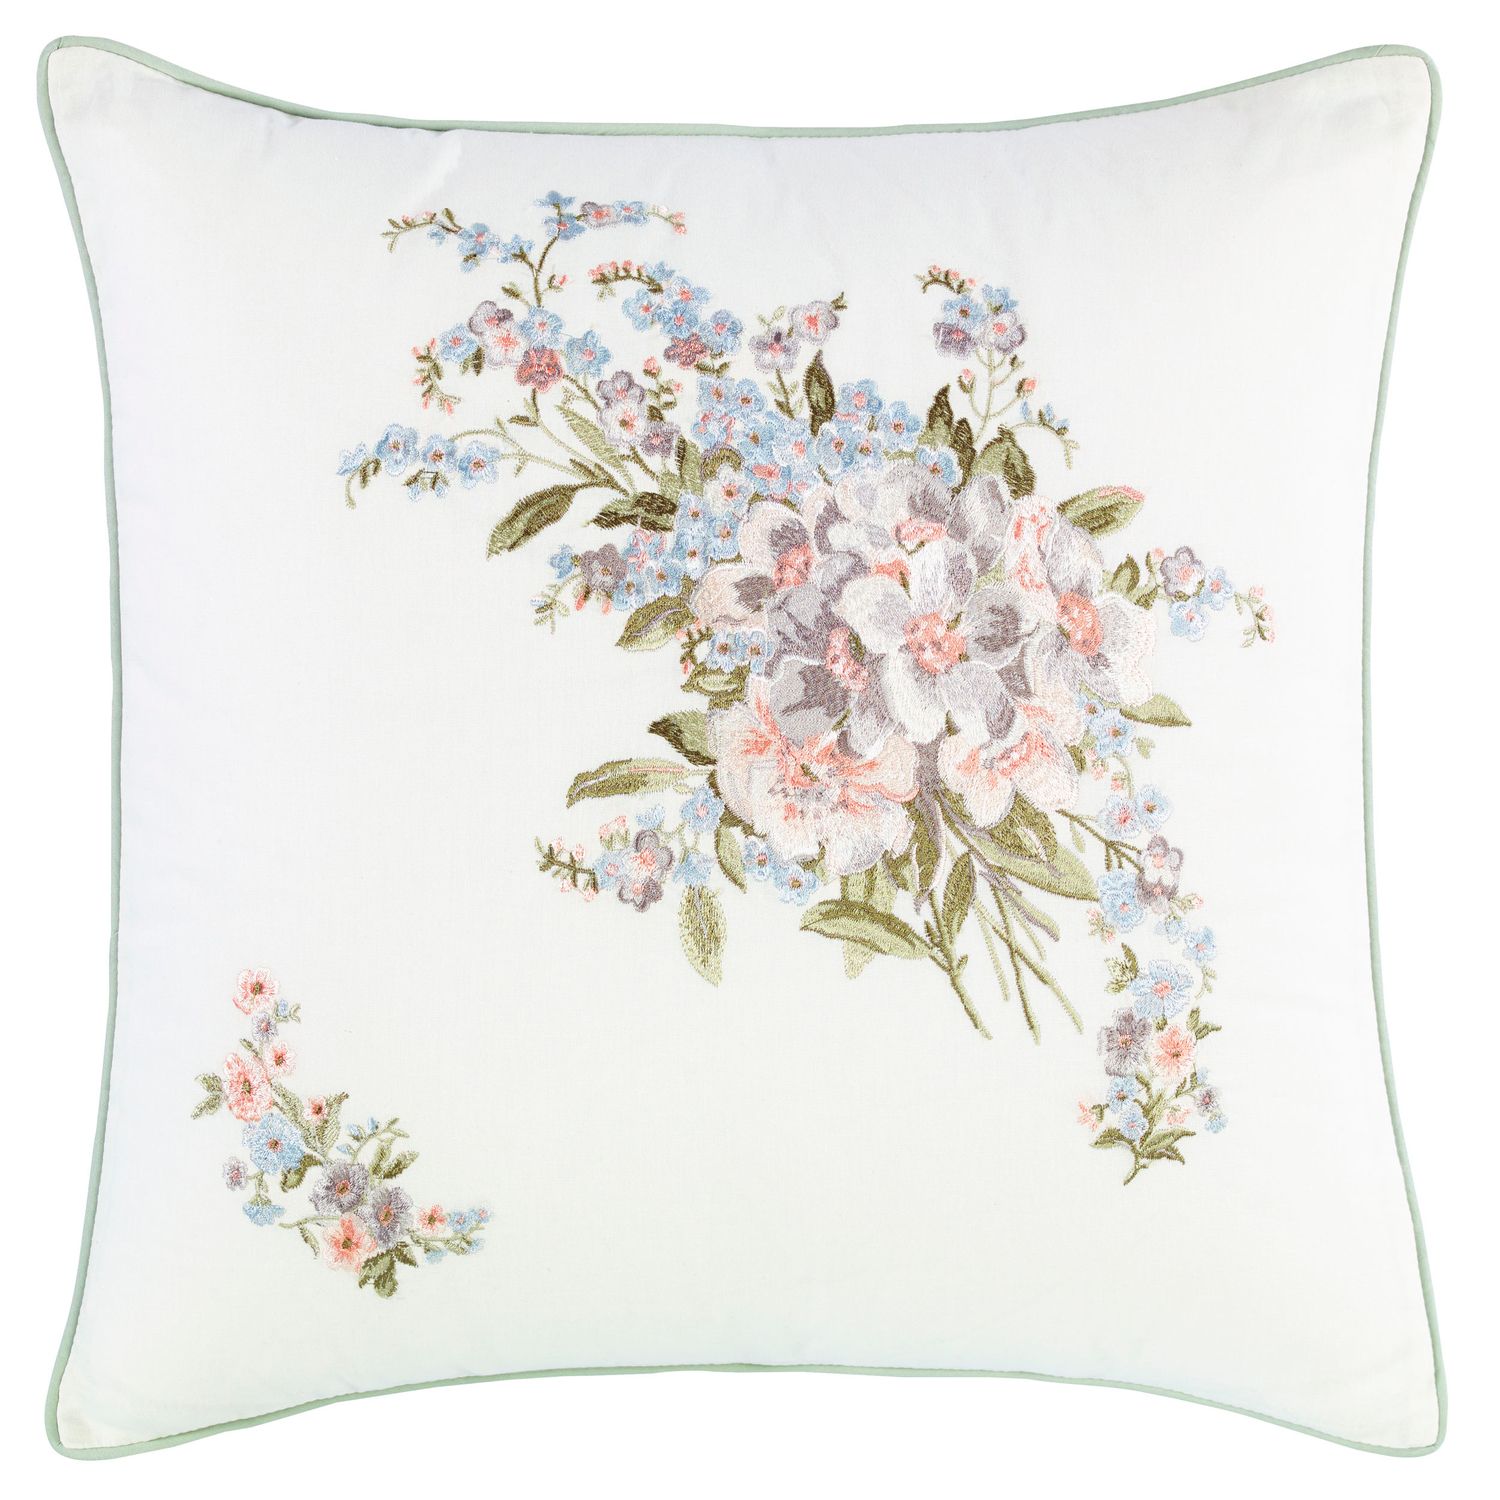 Image for Laura Ashley Lifestyles Harper Embroidered Throw Pillow at Kohl's.